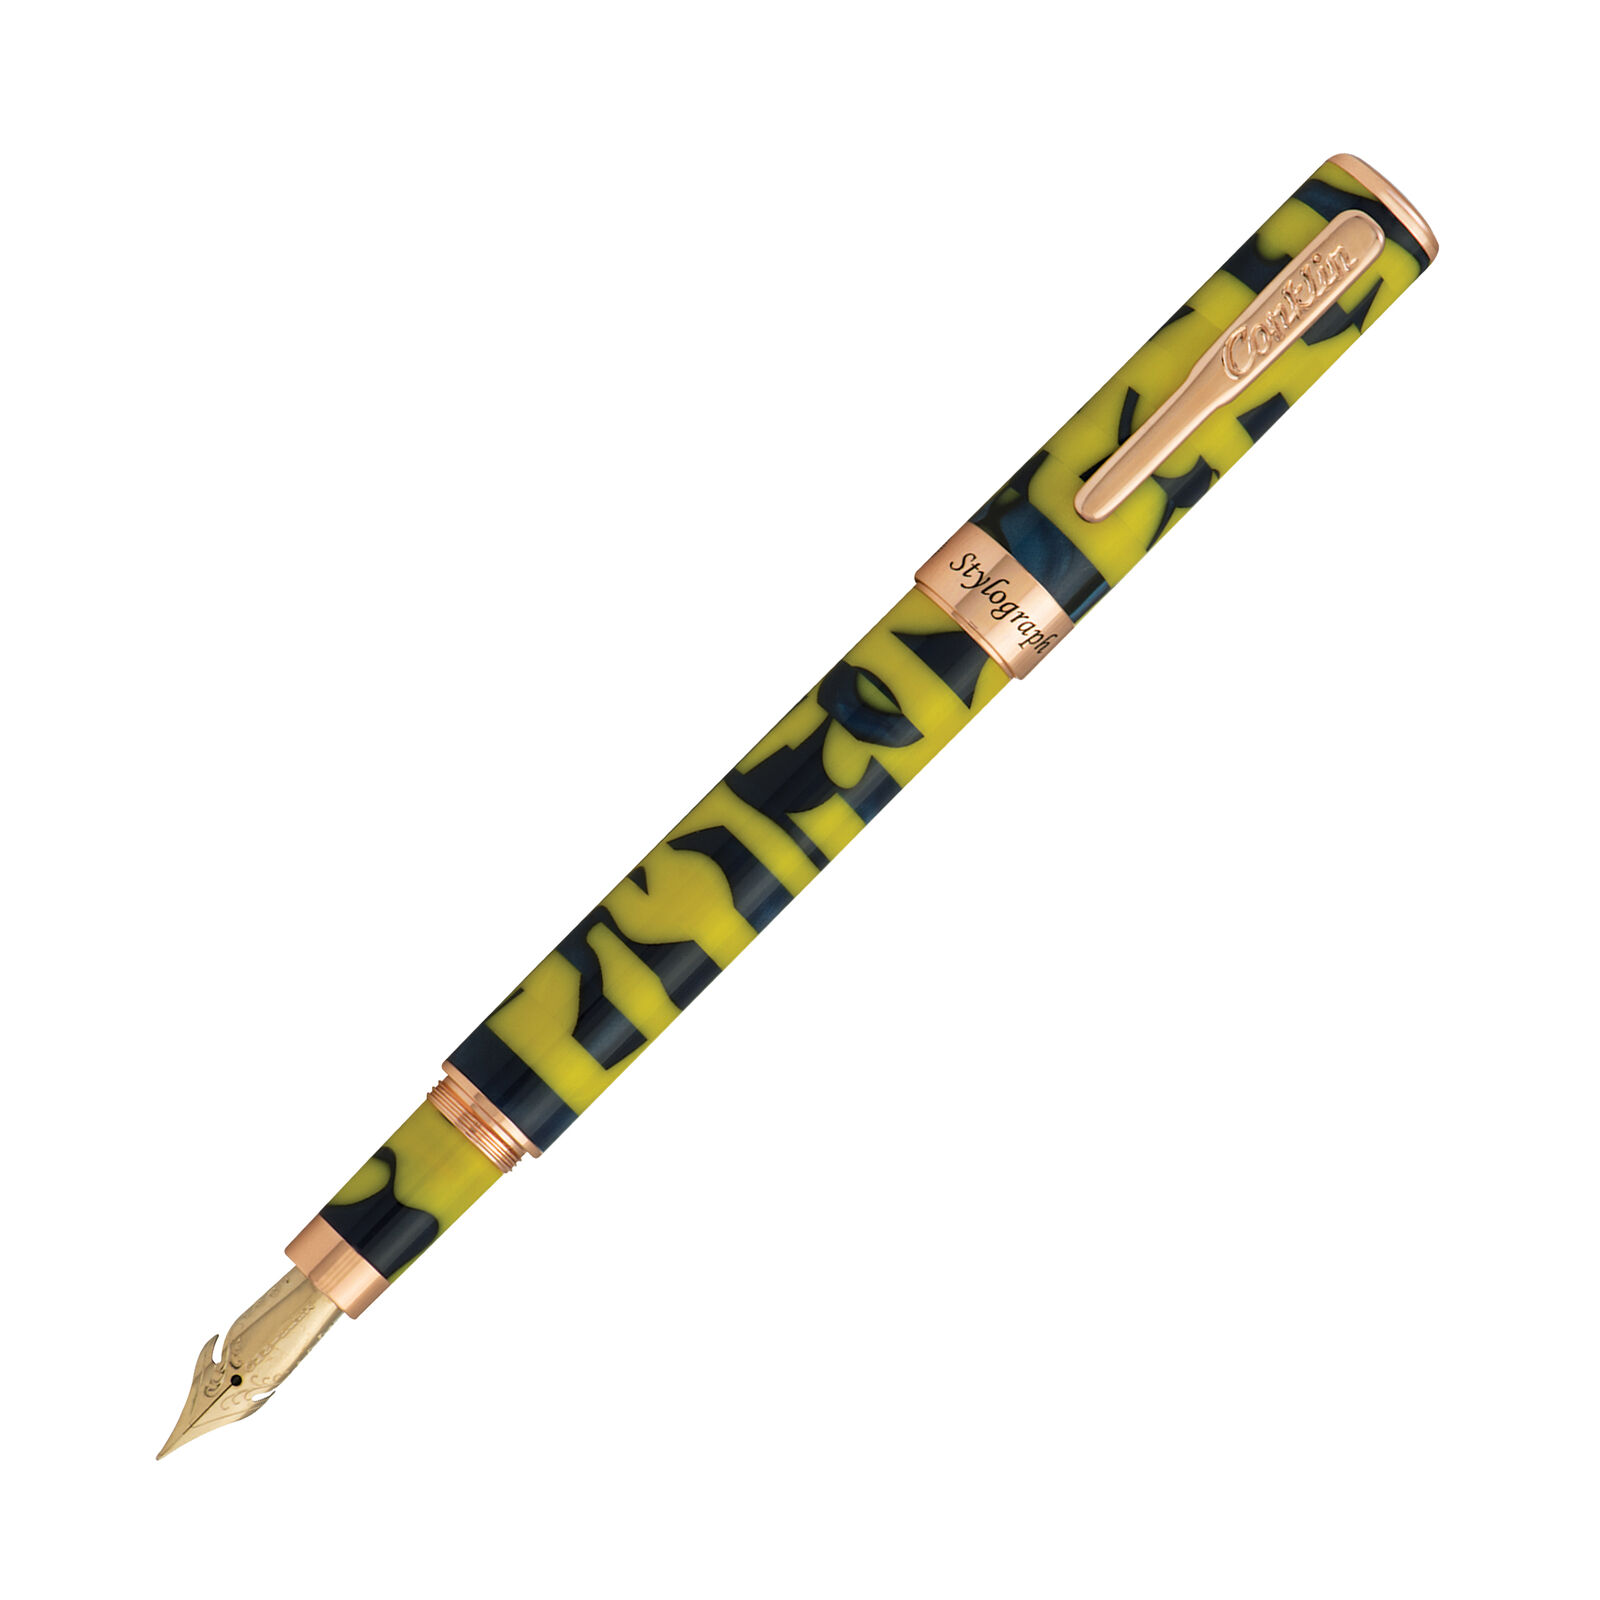 Conklin Stylograph Mosaic Fountain Pen in Yellow/Blue - Extra Fine Point - NEW